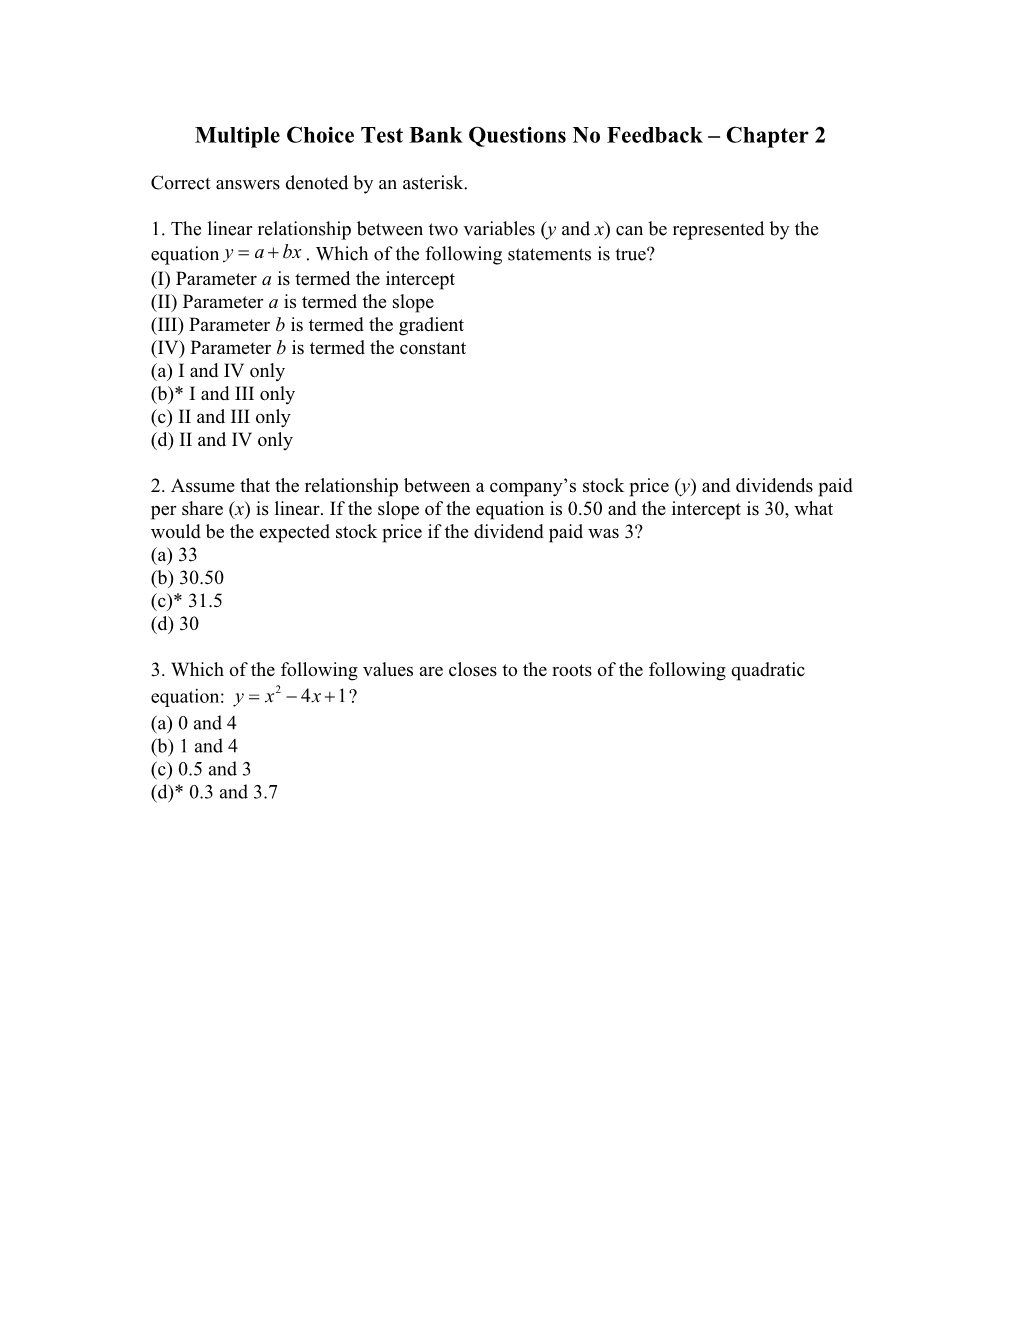 Multiple Choice Test Bank Questions No Feedback Chapters 1 and 2